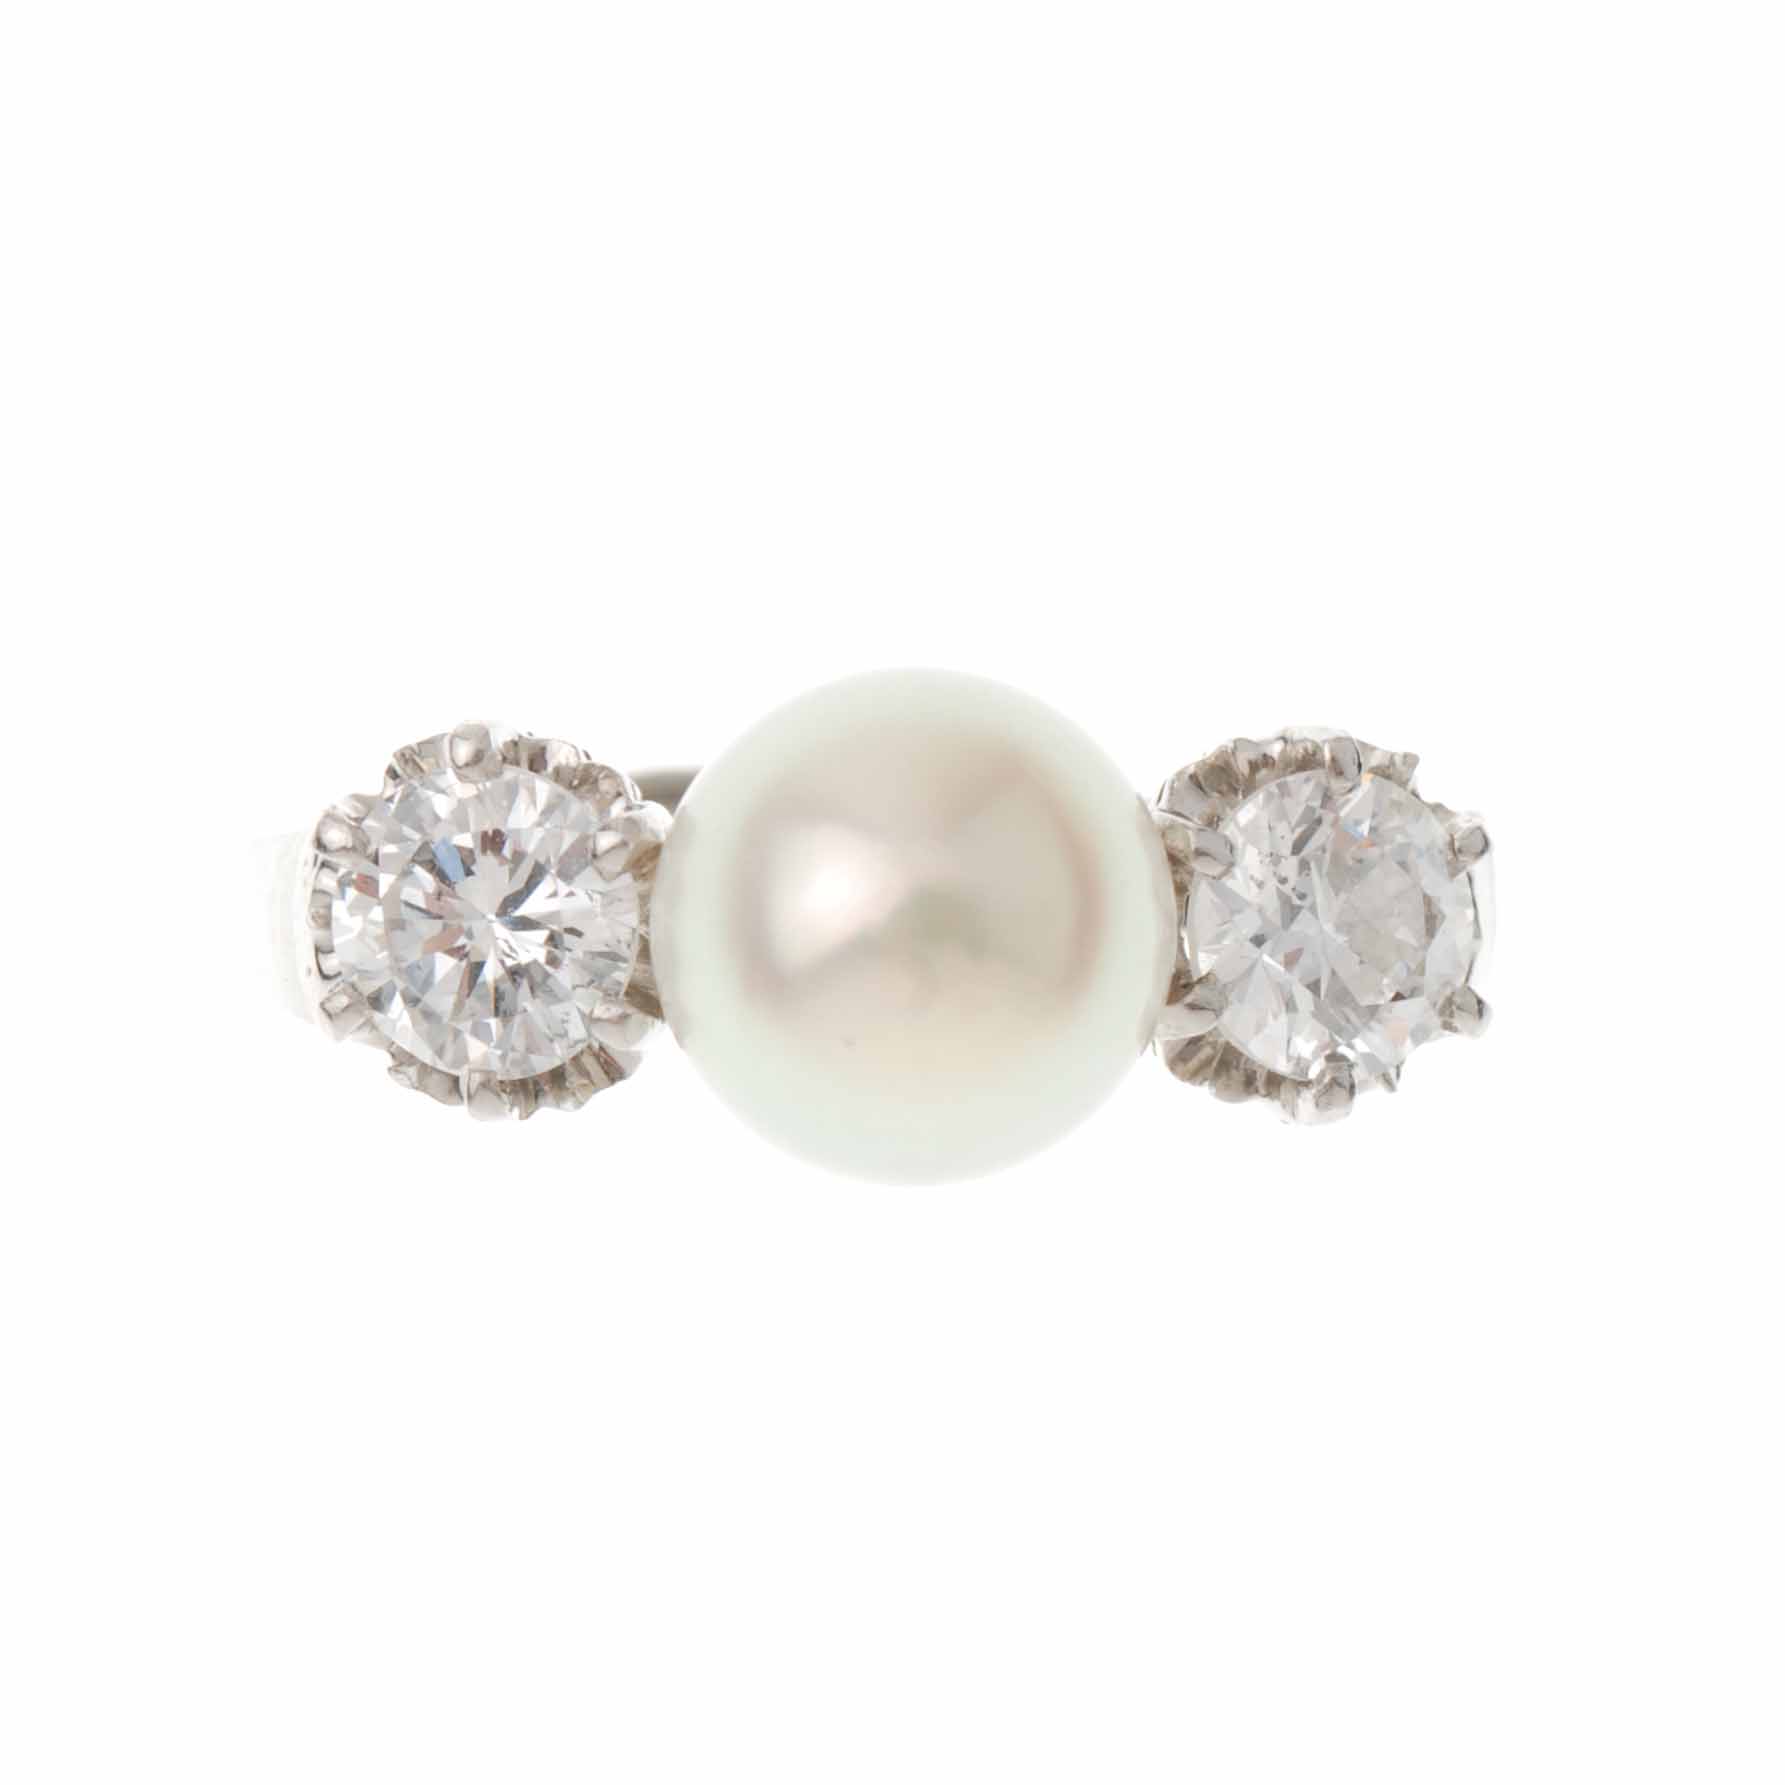 RING WITH A PEARL AND TWO DIAMONDS.